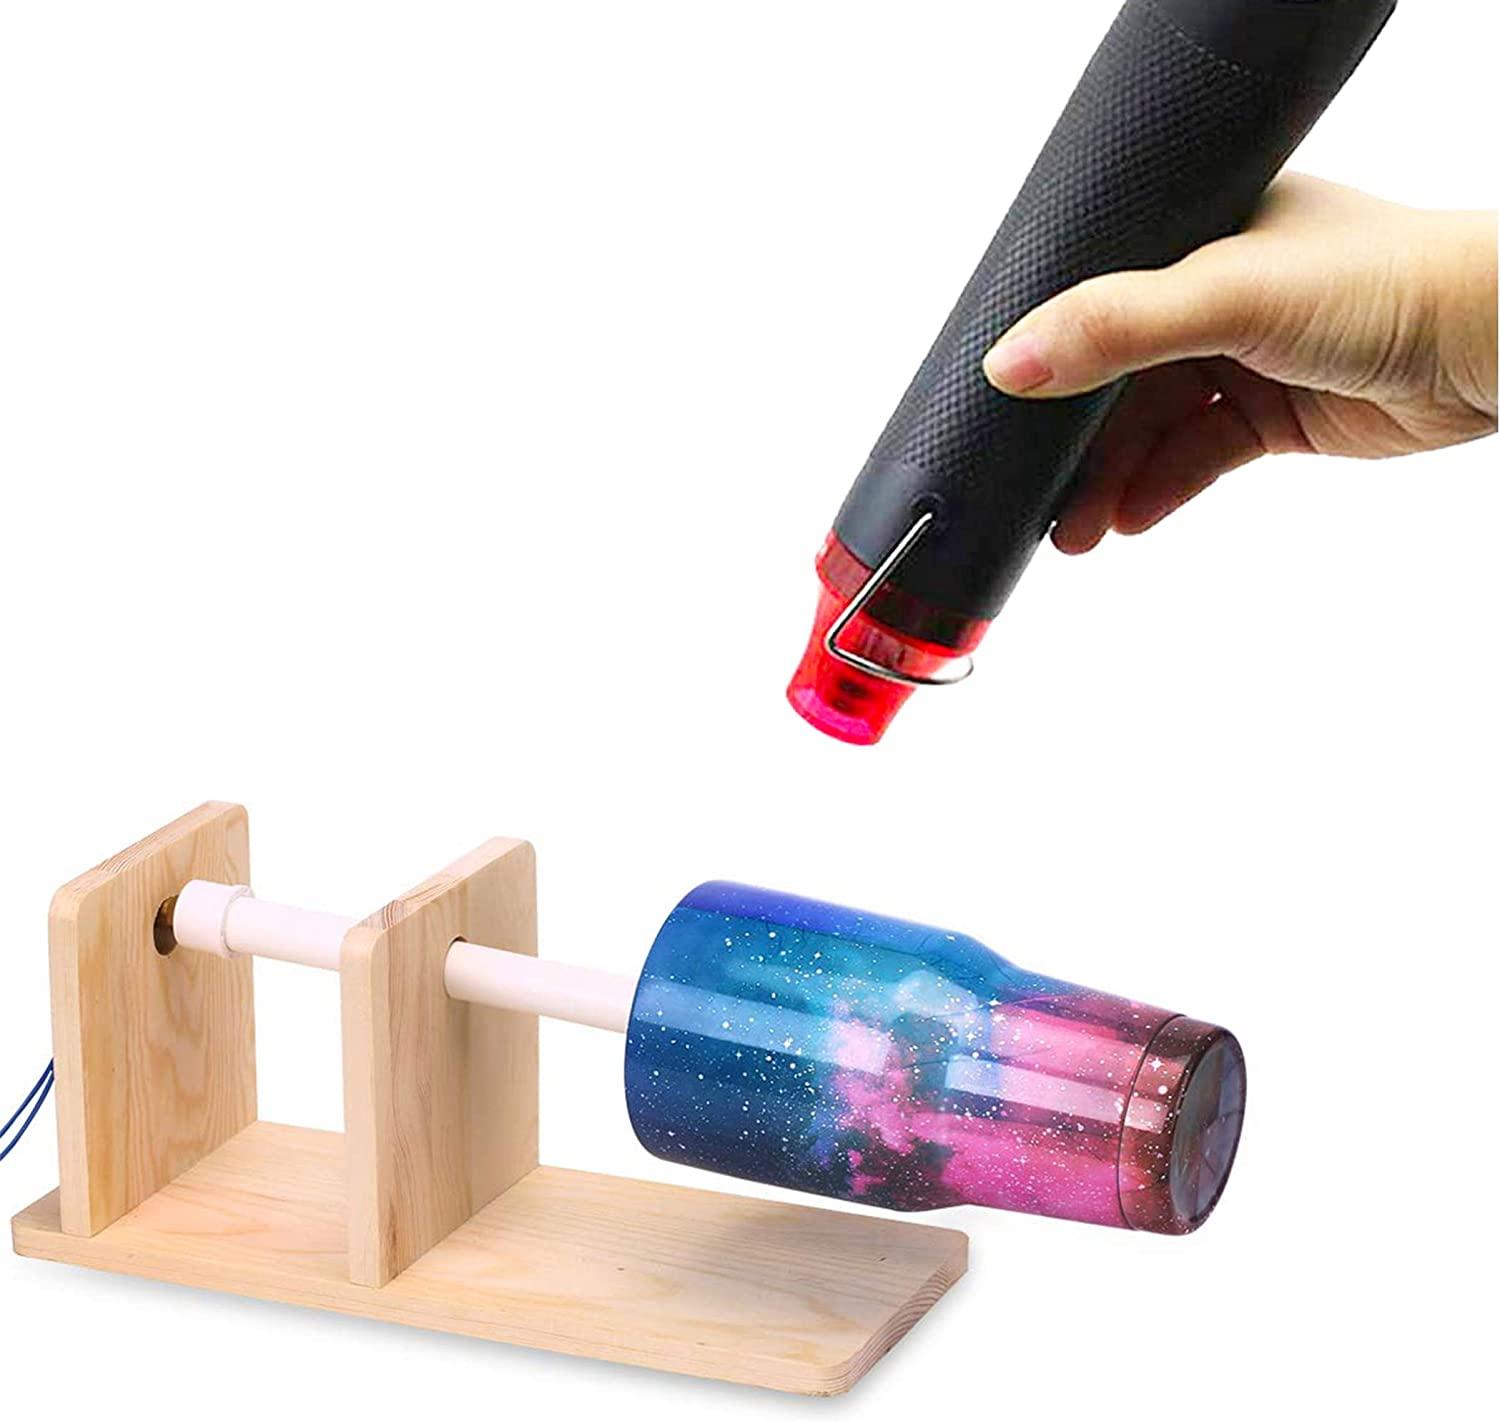 Bubble Removing Tool for Epoxy Resin and Acrylic Art, DIY Glitter Tumblers,  Specially-Designed Heat Gun for Making Acrylic Resin Travel Mugs Tumblers  to Remove Air Bubbles (Black)